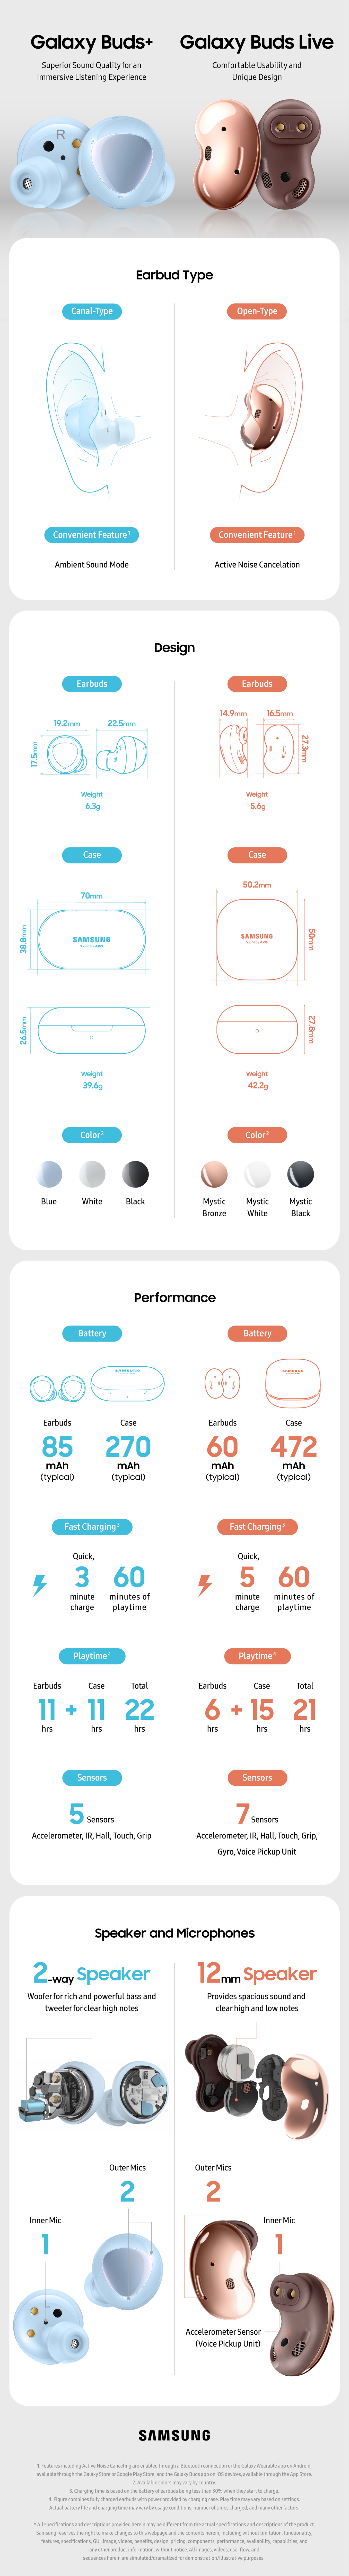 Infographic comparing the earbud type, design, performance, speaker and microphone placement of the Galaxy Buds Live and Galaxy Buds+